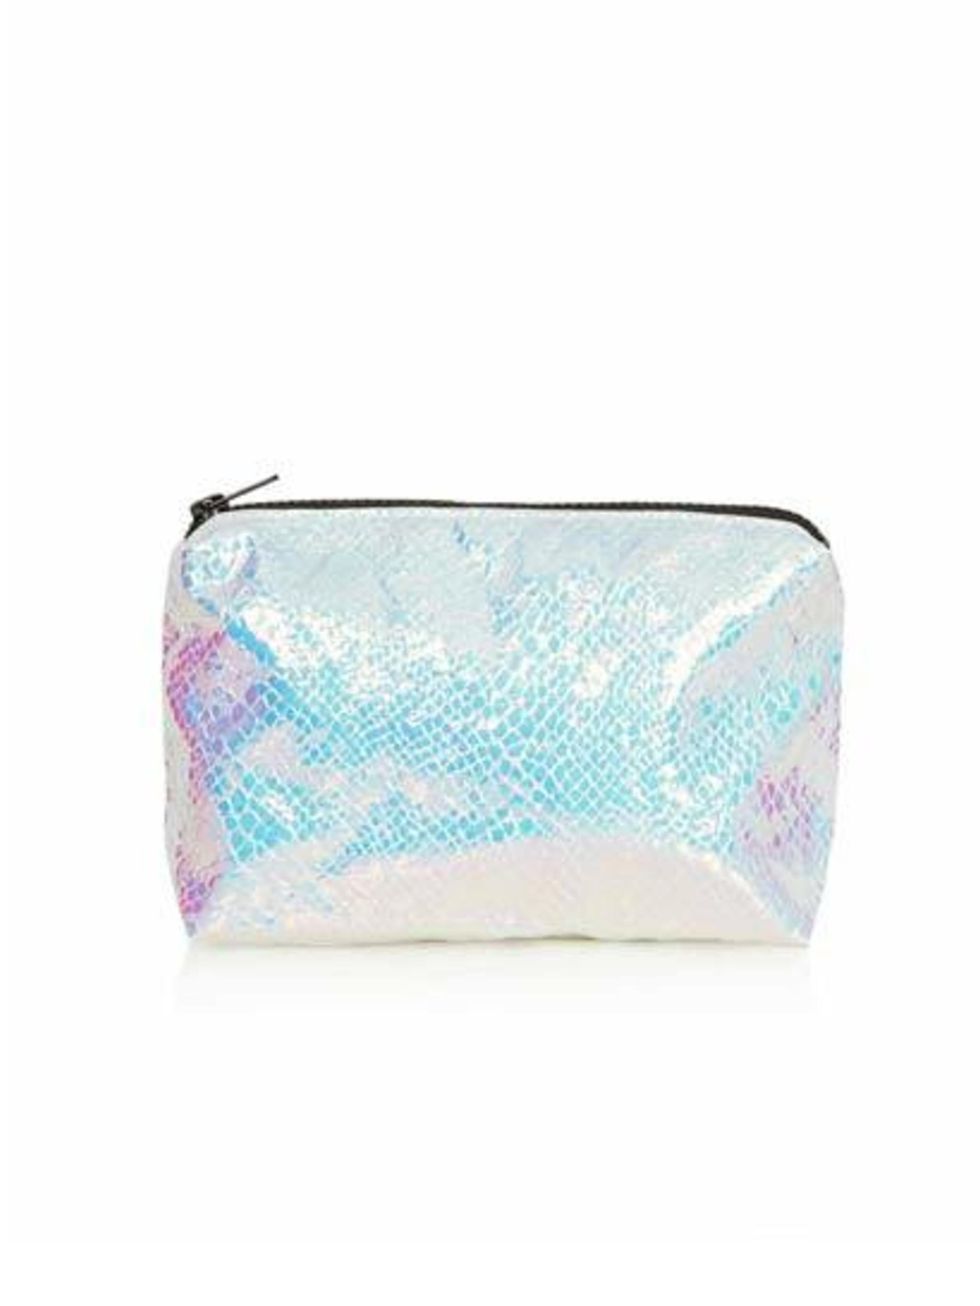 <p>Everyone needs to put their makeup in something. Treat them to this Mermaid Metallic Makeup Bag from <a href="http://www.topshop.com/en/tsuk/product/bags-accessories-1702216/bags-purses-462/mermaid-make-up-bag-2564367?bi=1&amp;ps=200">Topshop</a>, only